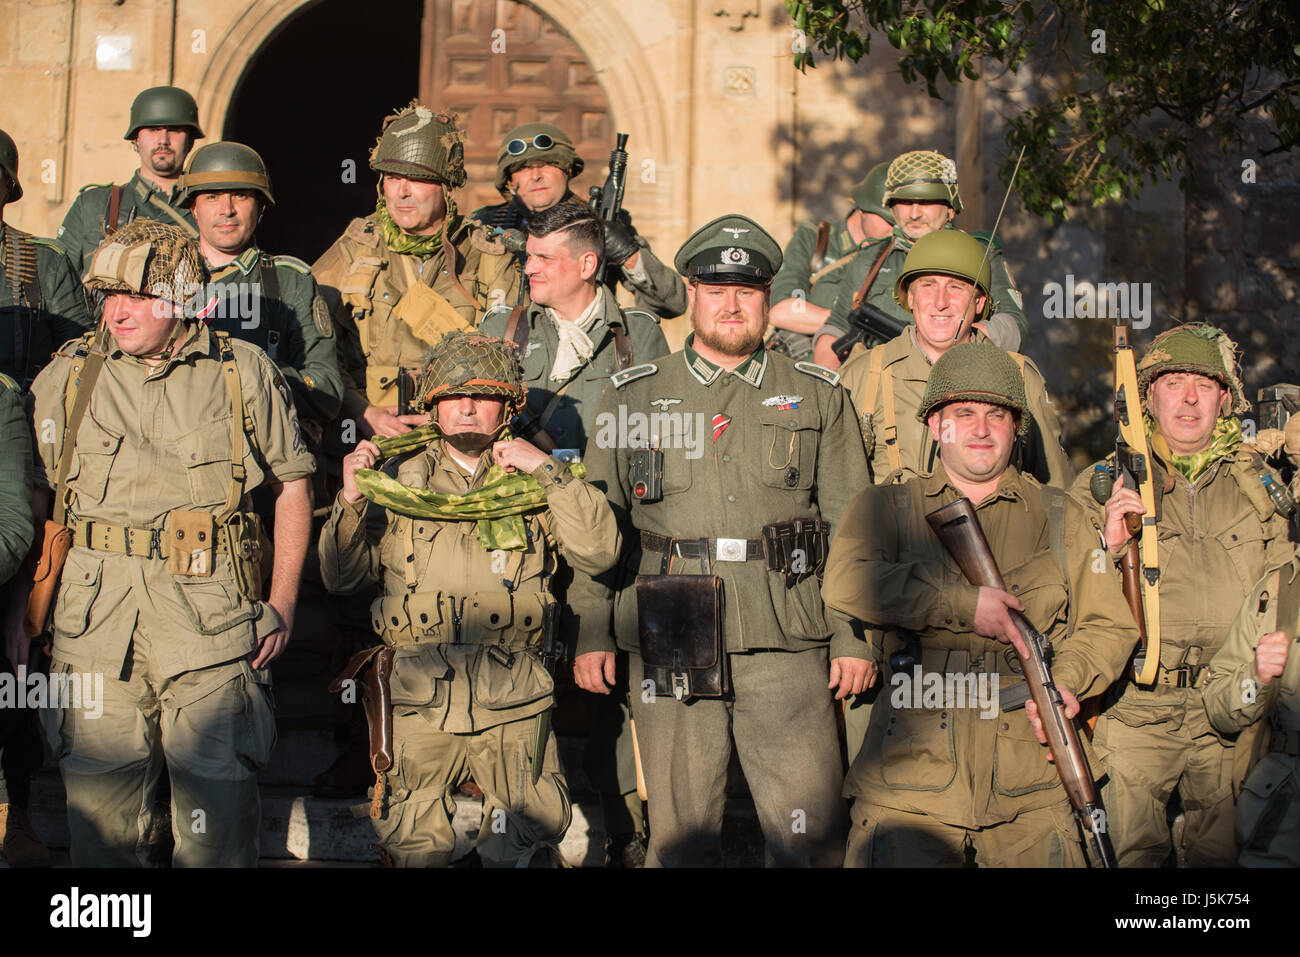 Belorado, Spain - May 6, 2017: Soldiers during World war 2 reenactment,  Military historical reconstruction of the battle of Salerno 1943, on May 6, 2 Stock Photo